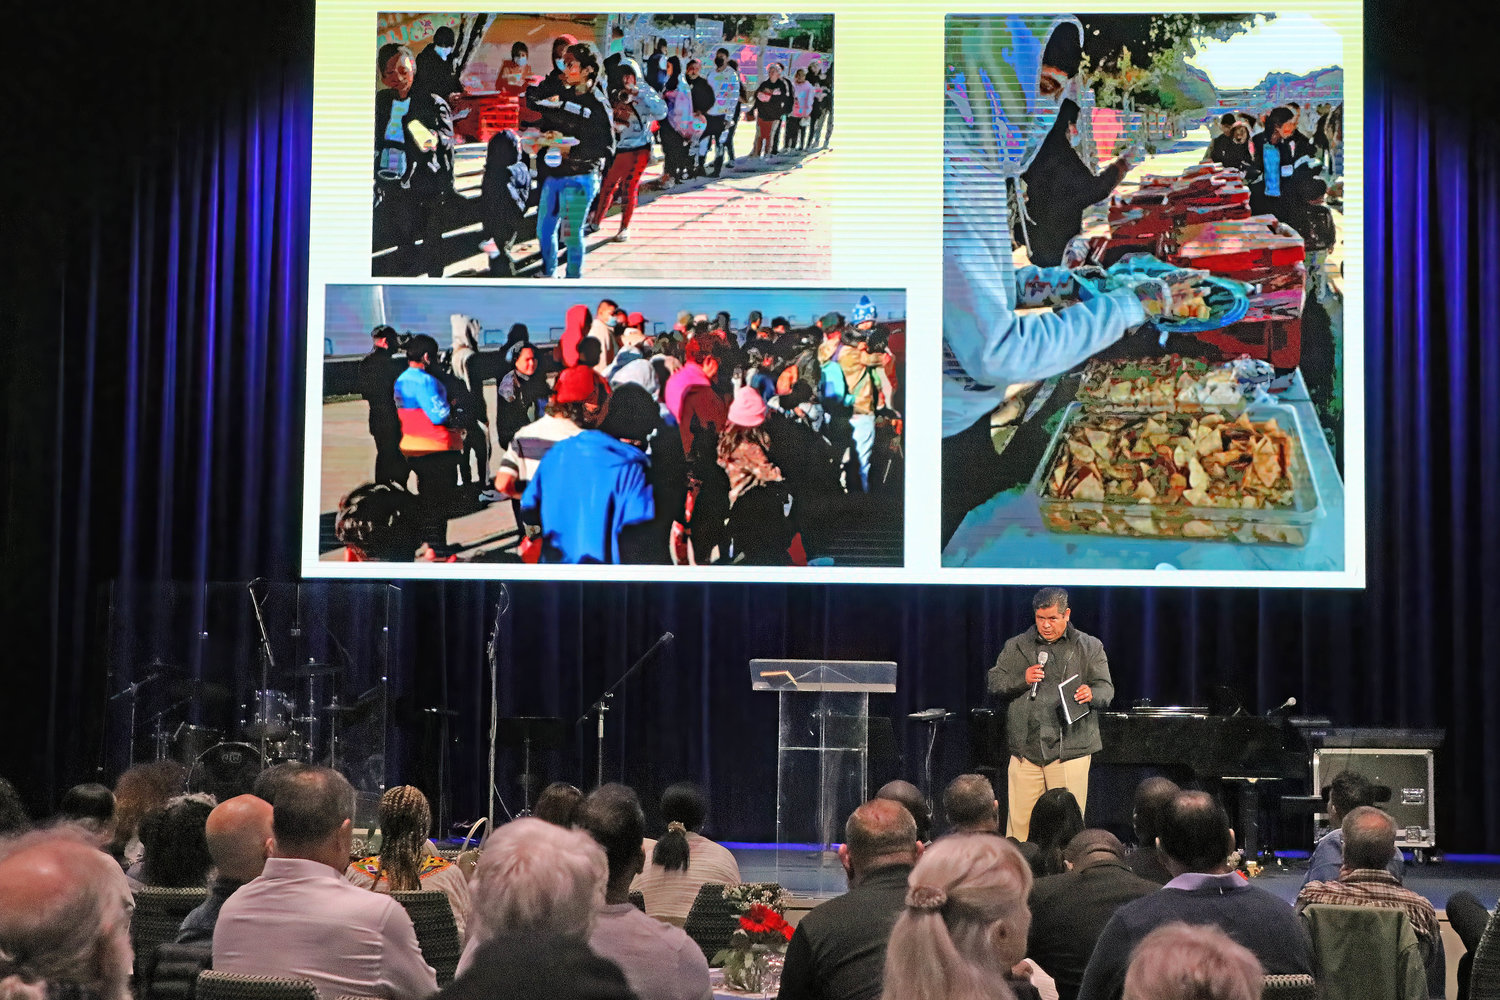 Missionary Juvenal Gonzalez shared loving and inspiring report from his area of responsibility among the refugees and migrants south of the border in Mexico City.  It was one of the highlights during the San Diego Southern Baptist Association 80th Anniversary on Saturday January 14, 2023, El Cajon, CA.